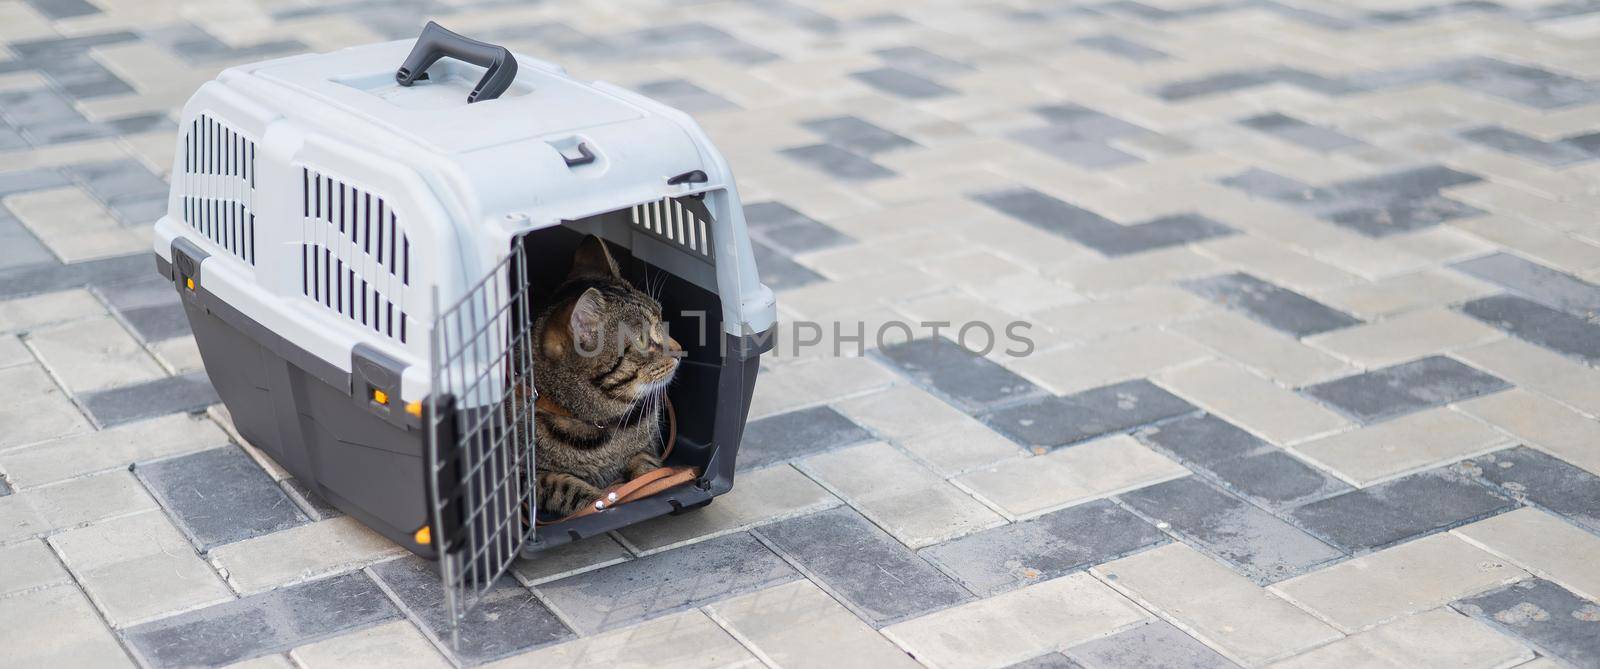 Gray tabby cat lies in a carrier on the sidewalk outdoors